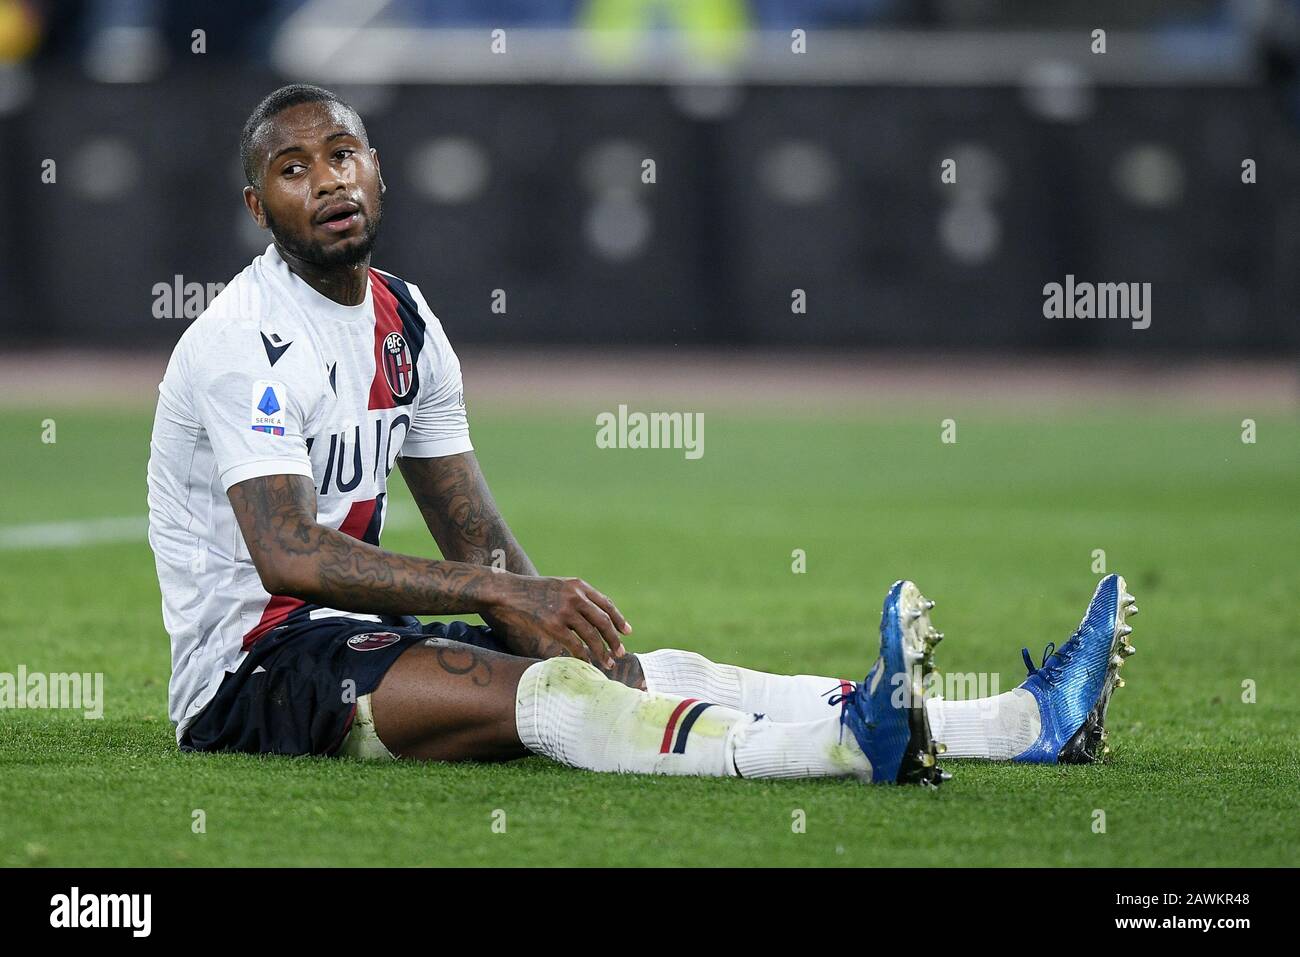 Stefano Denswil of Bologna looks dejected scoring an own goal during the Serie A match between Roma and Bologna at Stadio Olimpico, Rome, Italy on 7 February 2020. Photo by Giuseppe Maffia. Stock Photo